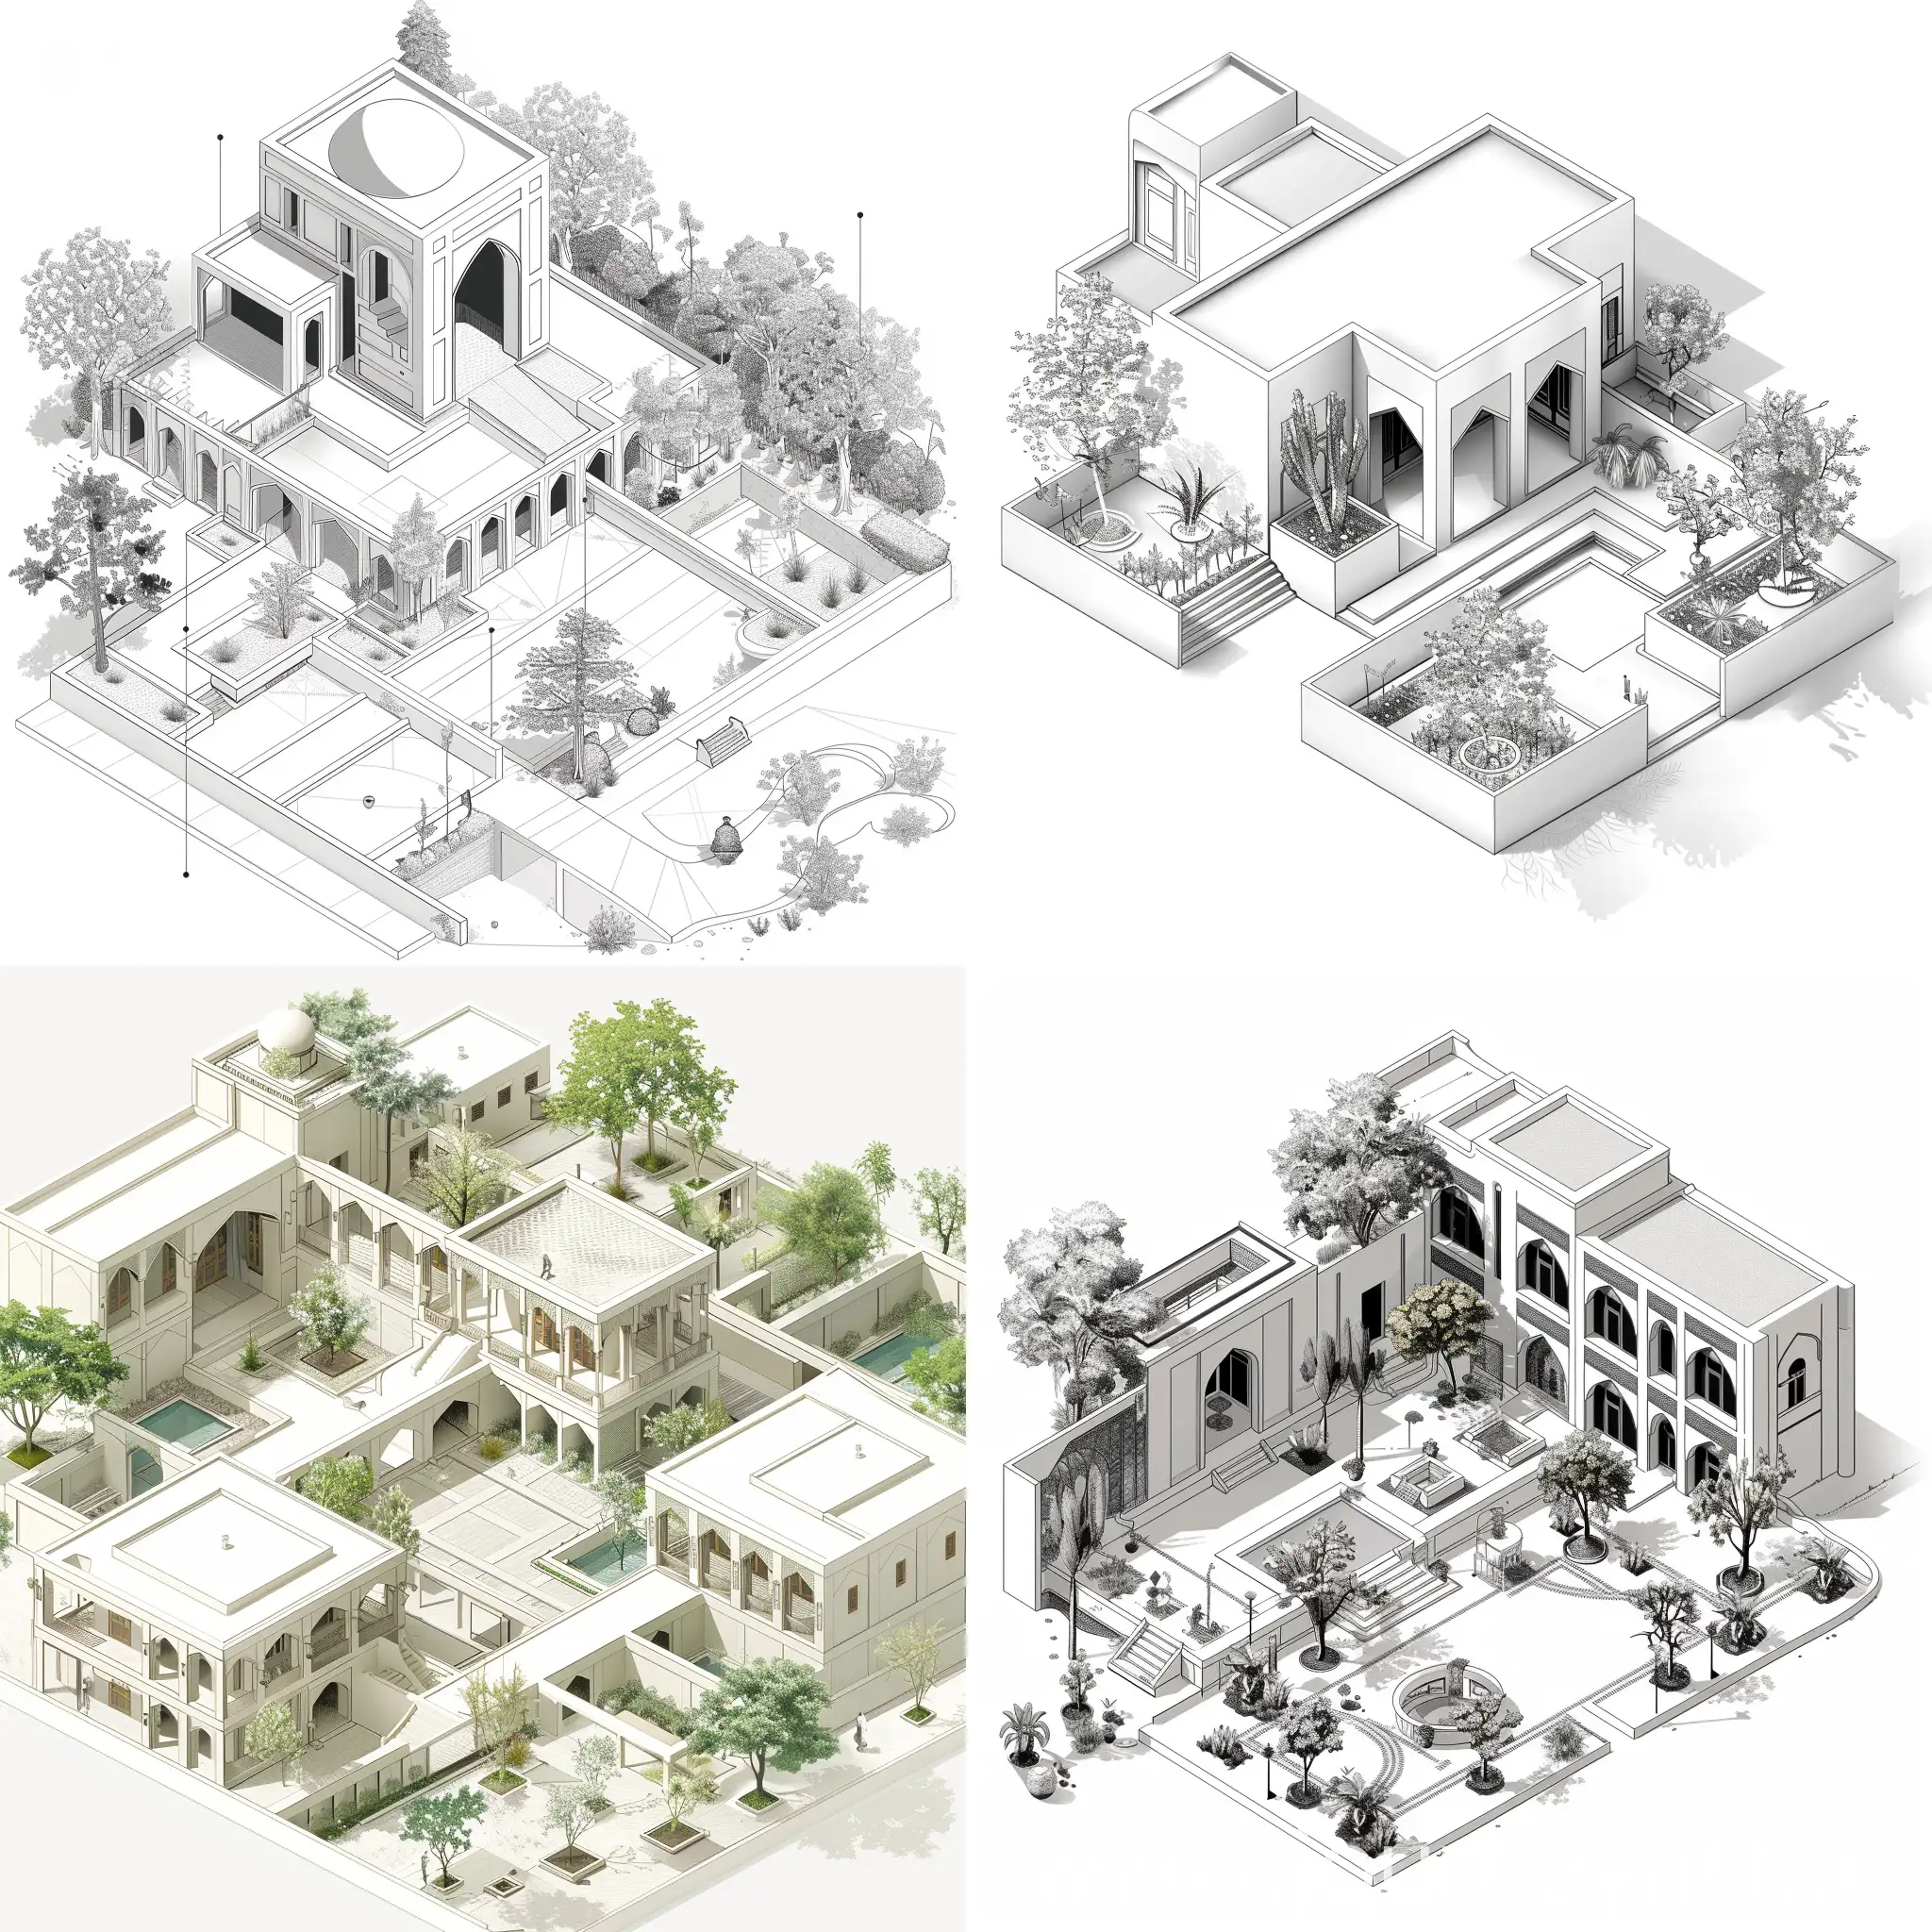 Historic-Persian-Architecture-Meets-Modern-Residential-Design-in-Isometric-2D-Illustration